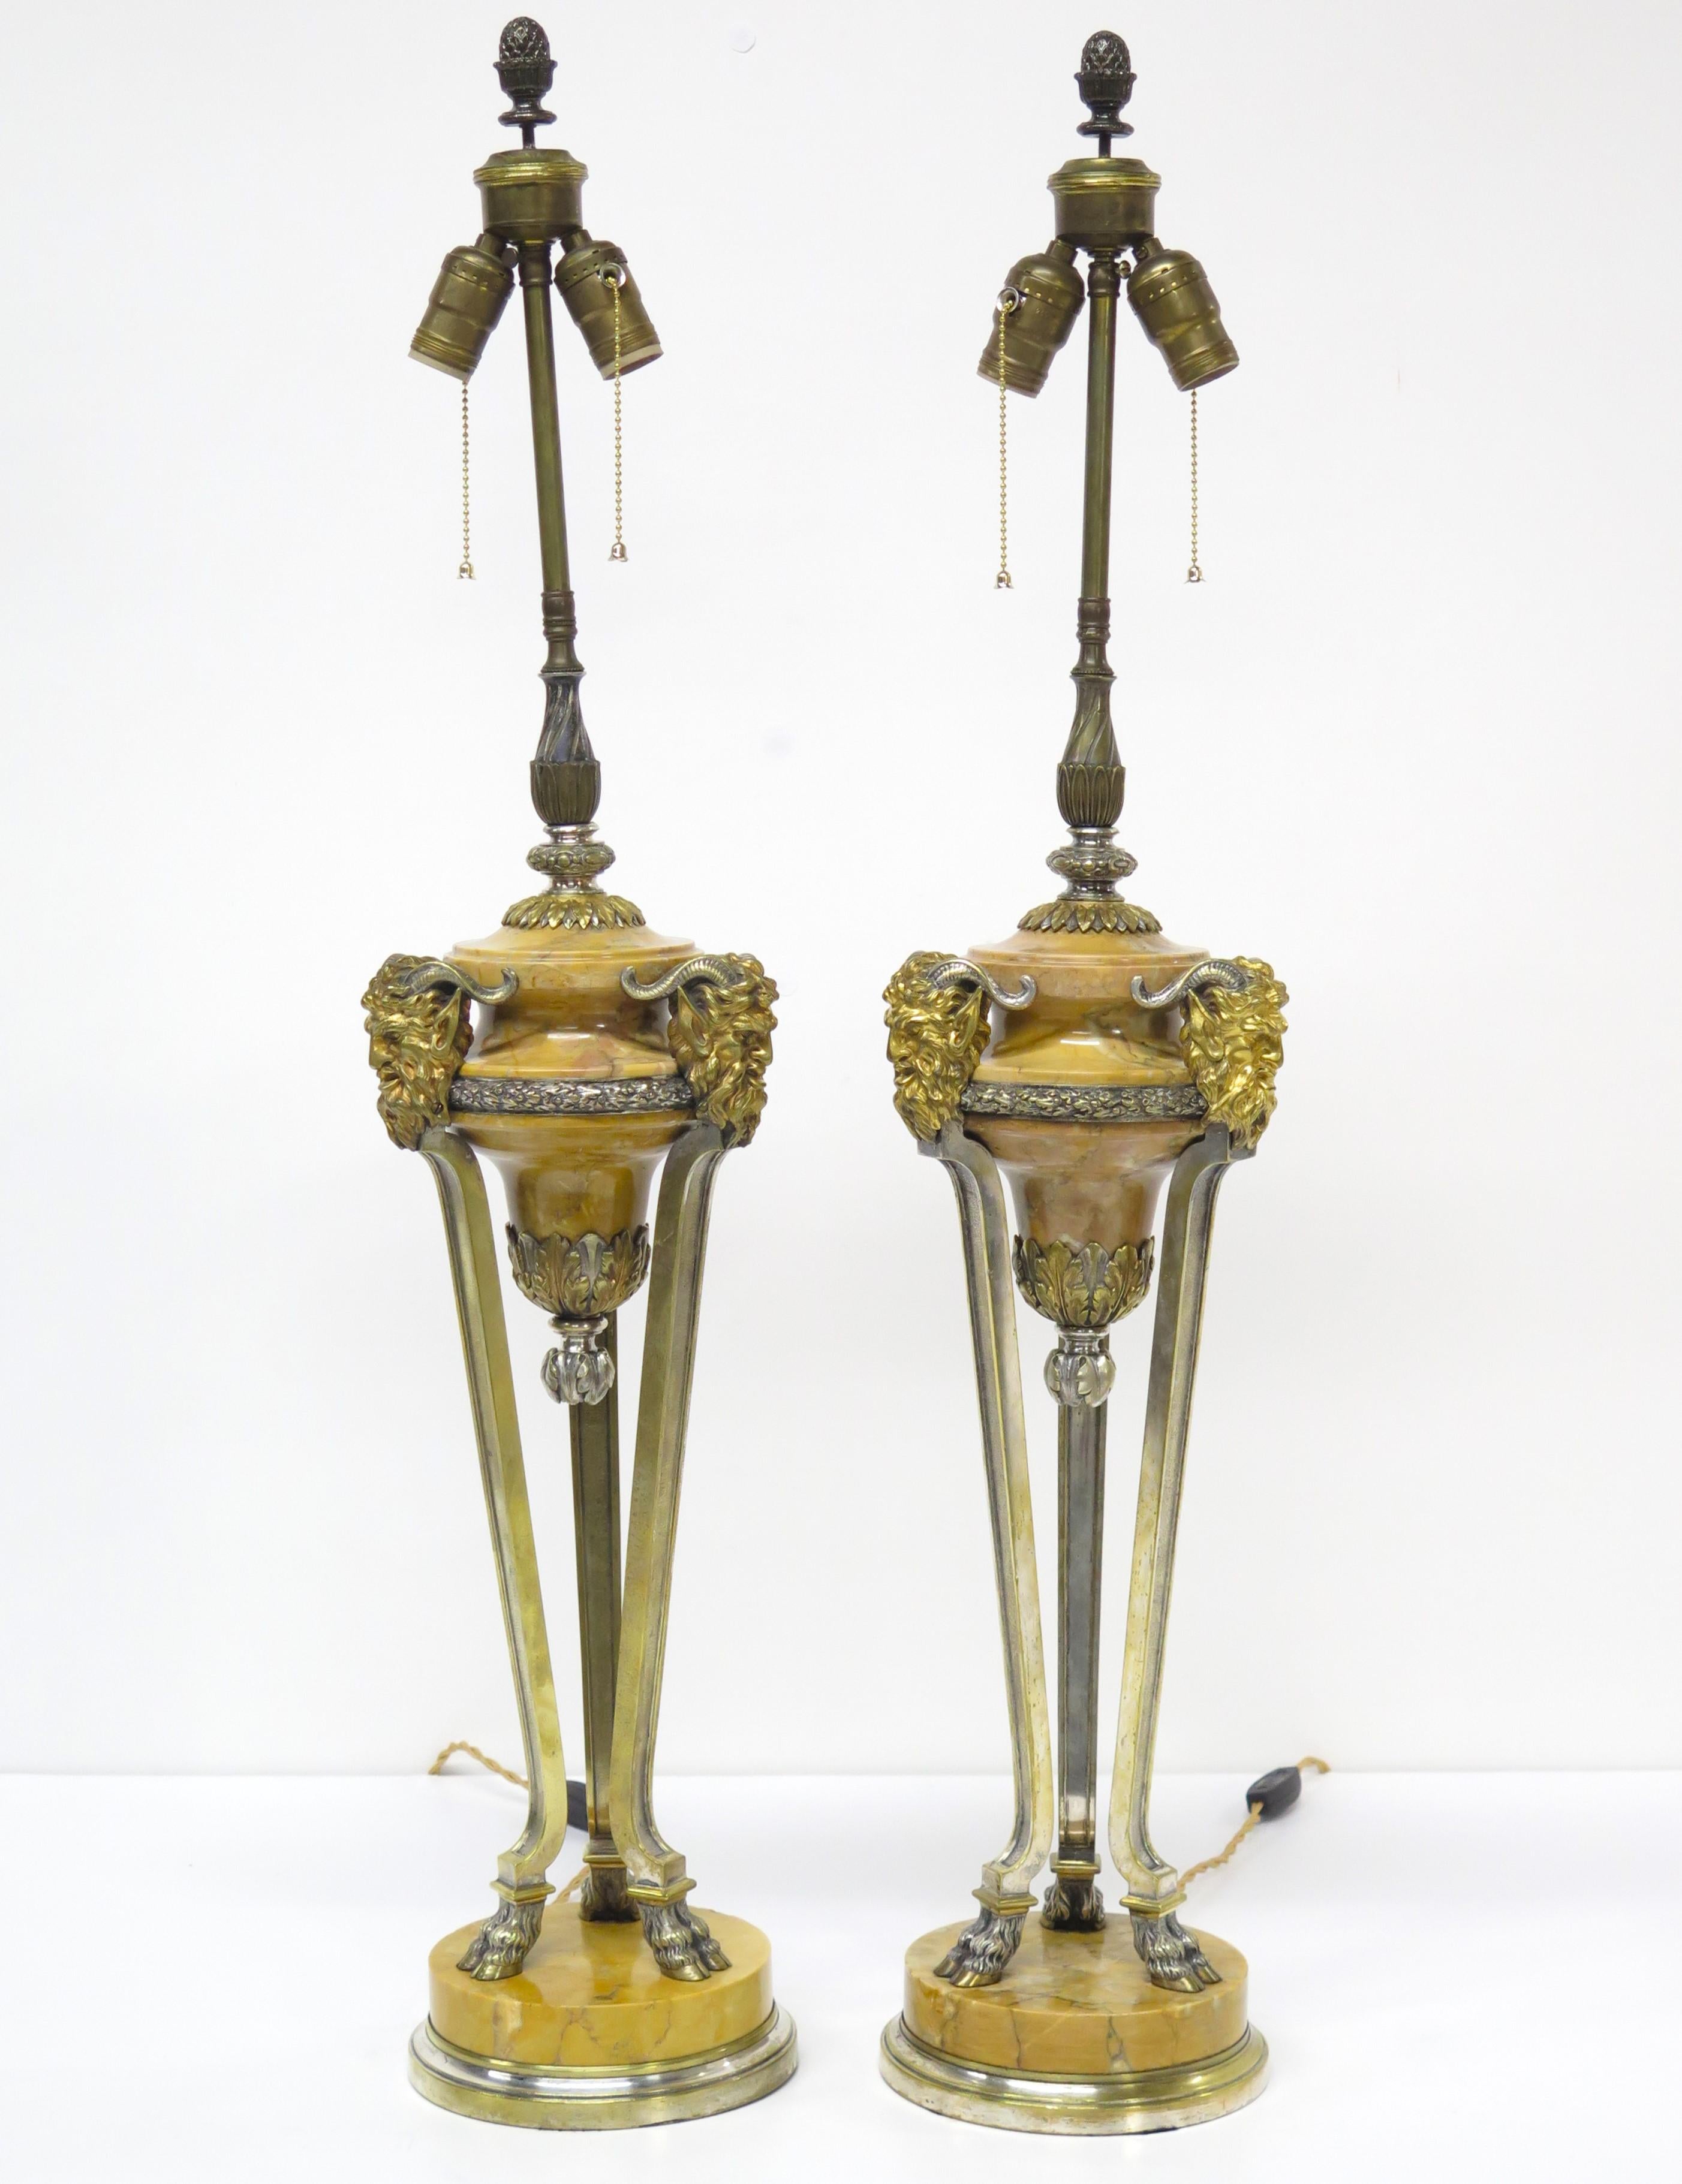 a pair of fine lamps of Siena marble with gold and silver gilt bronze mounts and supports, France, circa 1830

37